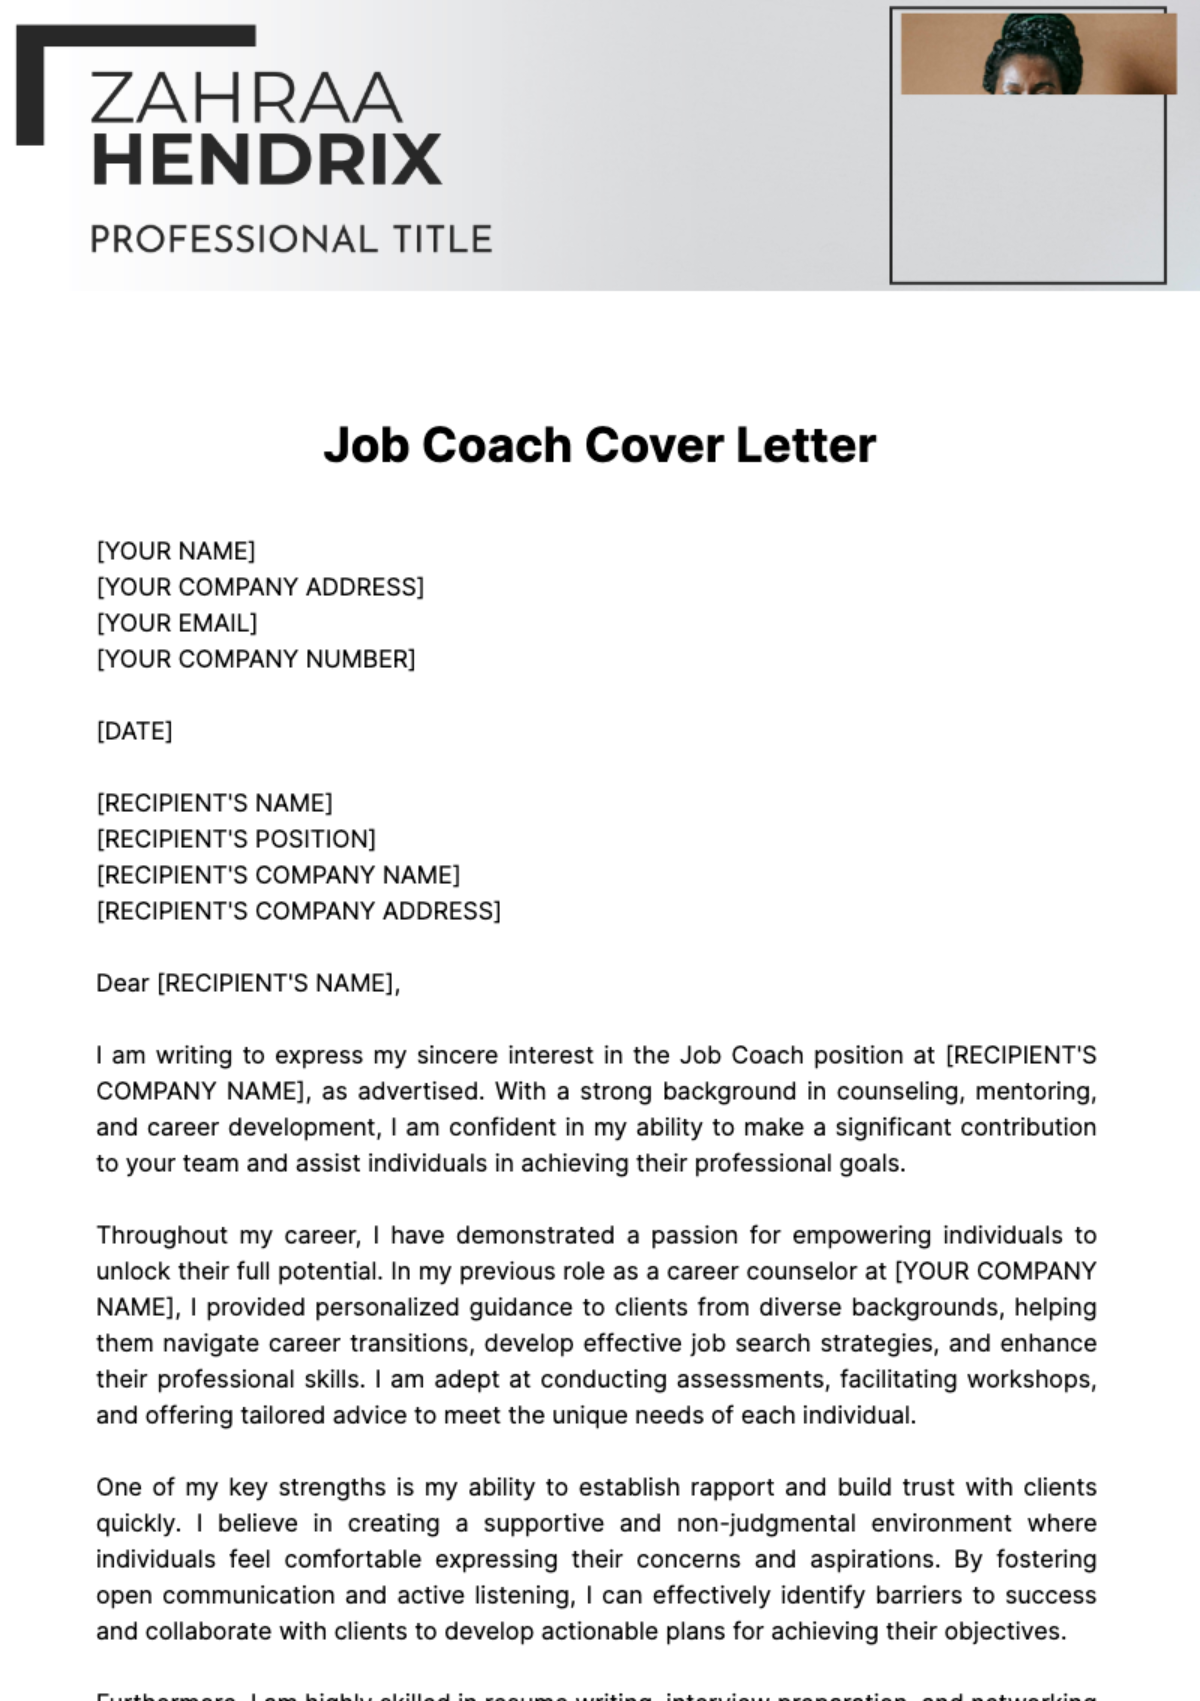 Free Job Coach Cover Letter Template